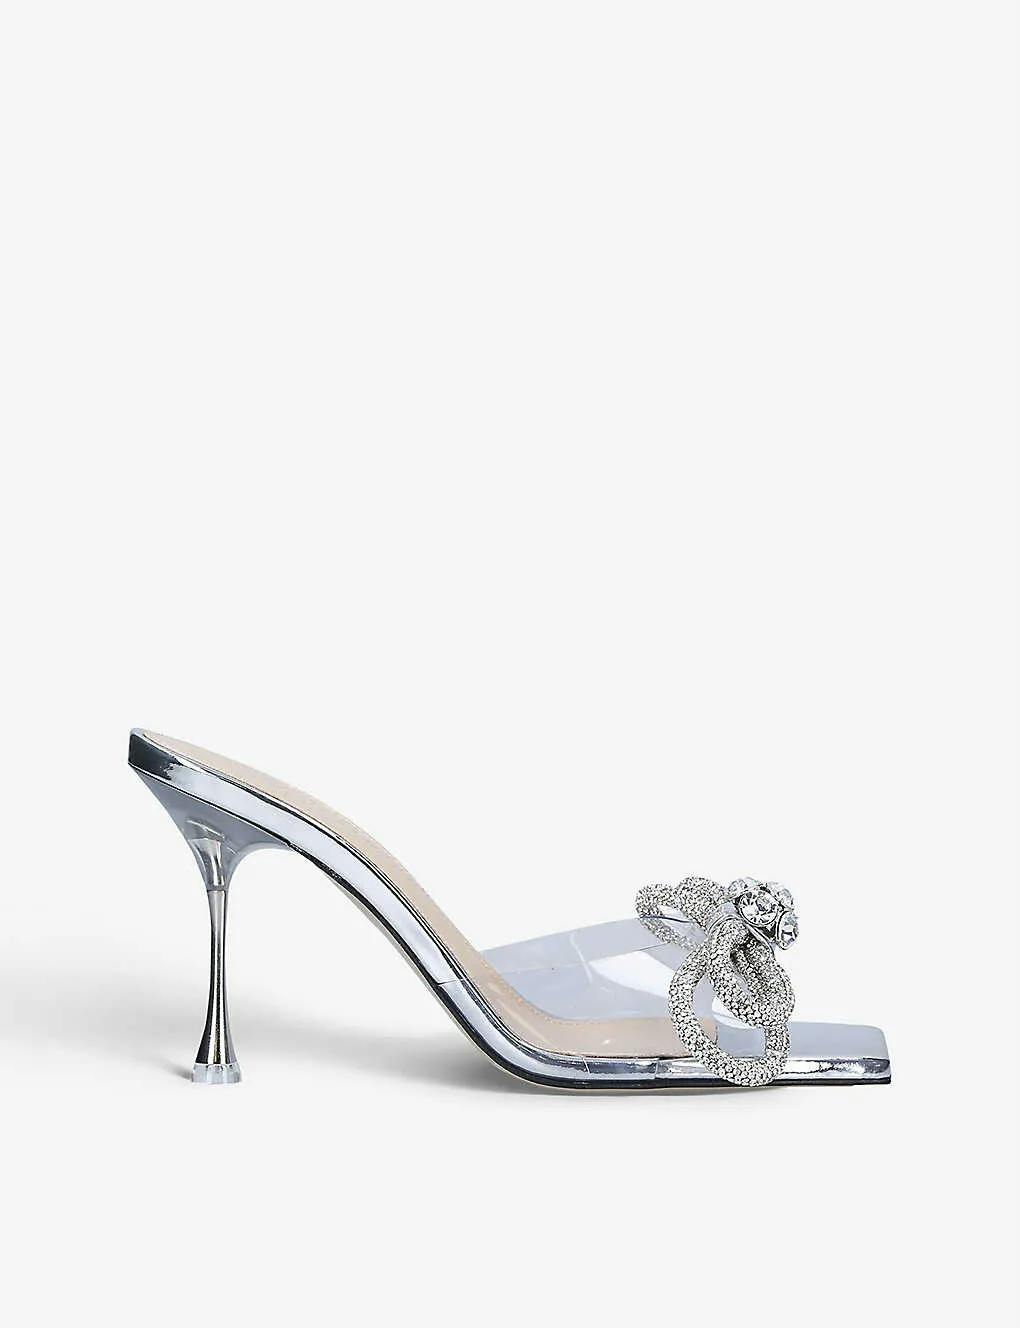 A high-heeled silver sandal with a clear strap adorned with a decorative, sparkling bow accent. The heel is thin and metallic, and the insole is a light beige color. The shoe is modern and elegant, suitable for dressy occasions.